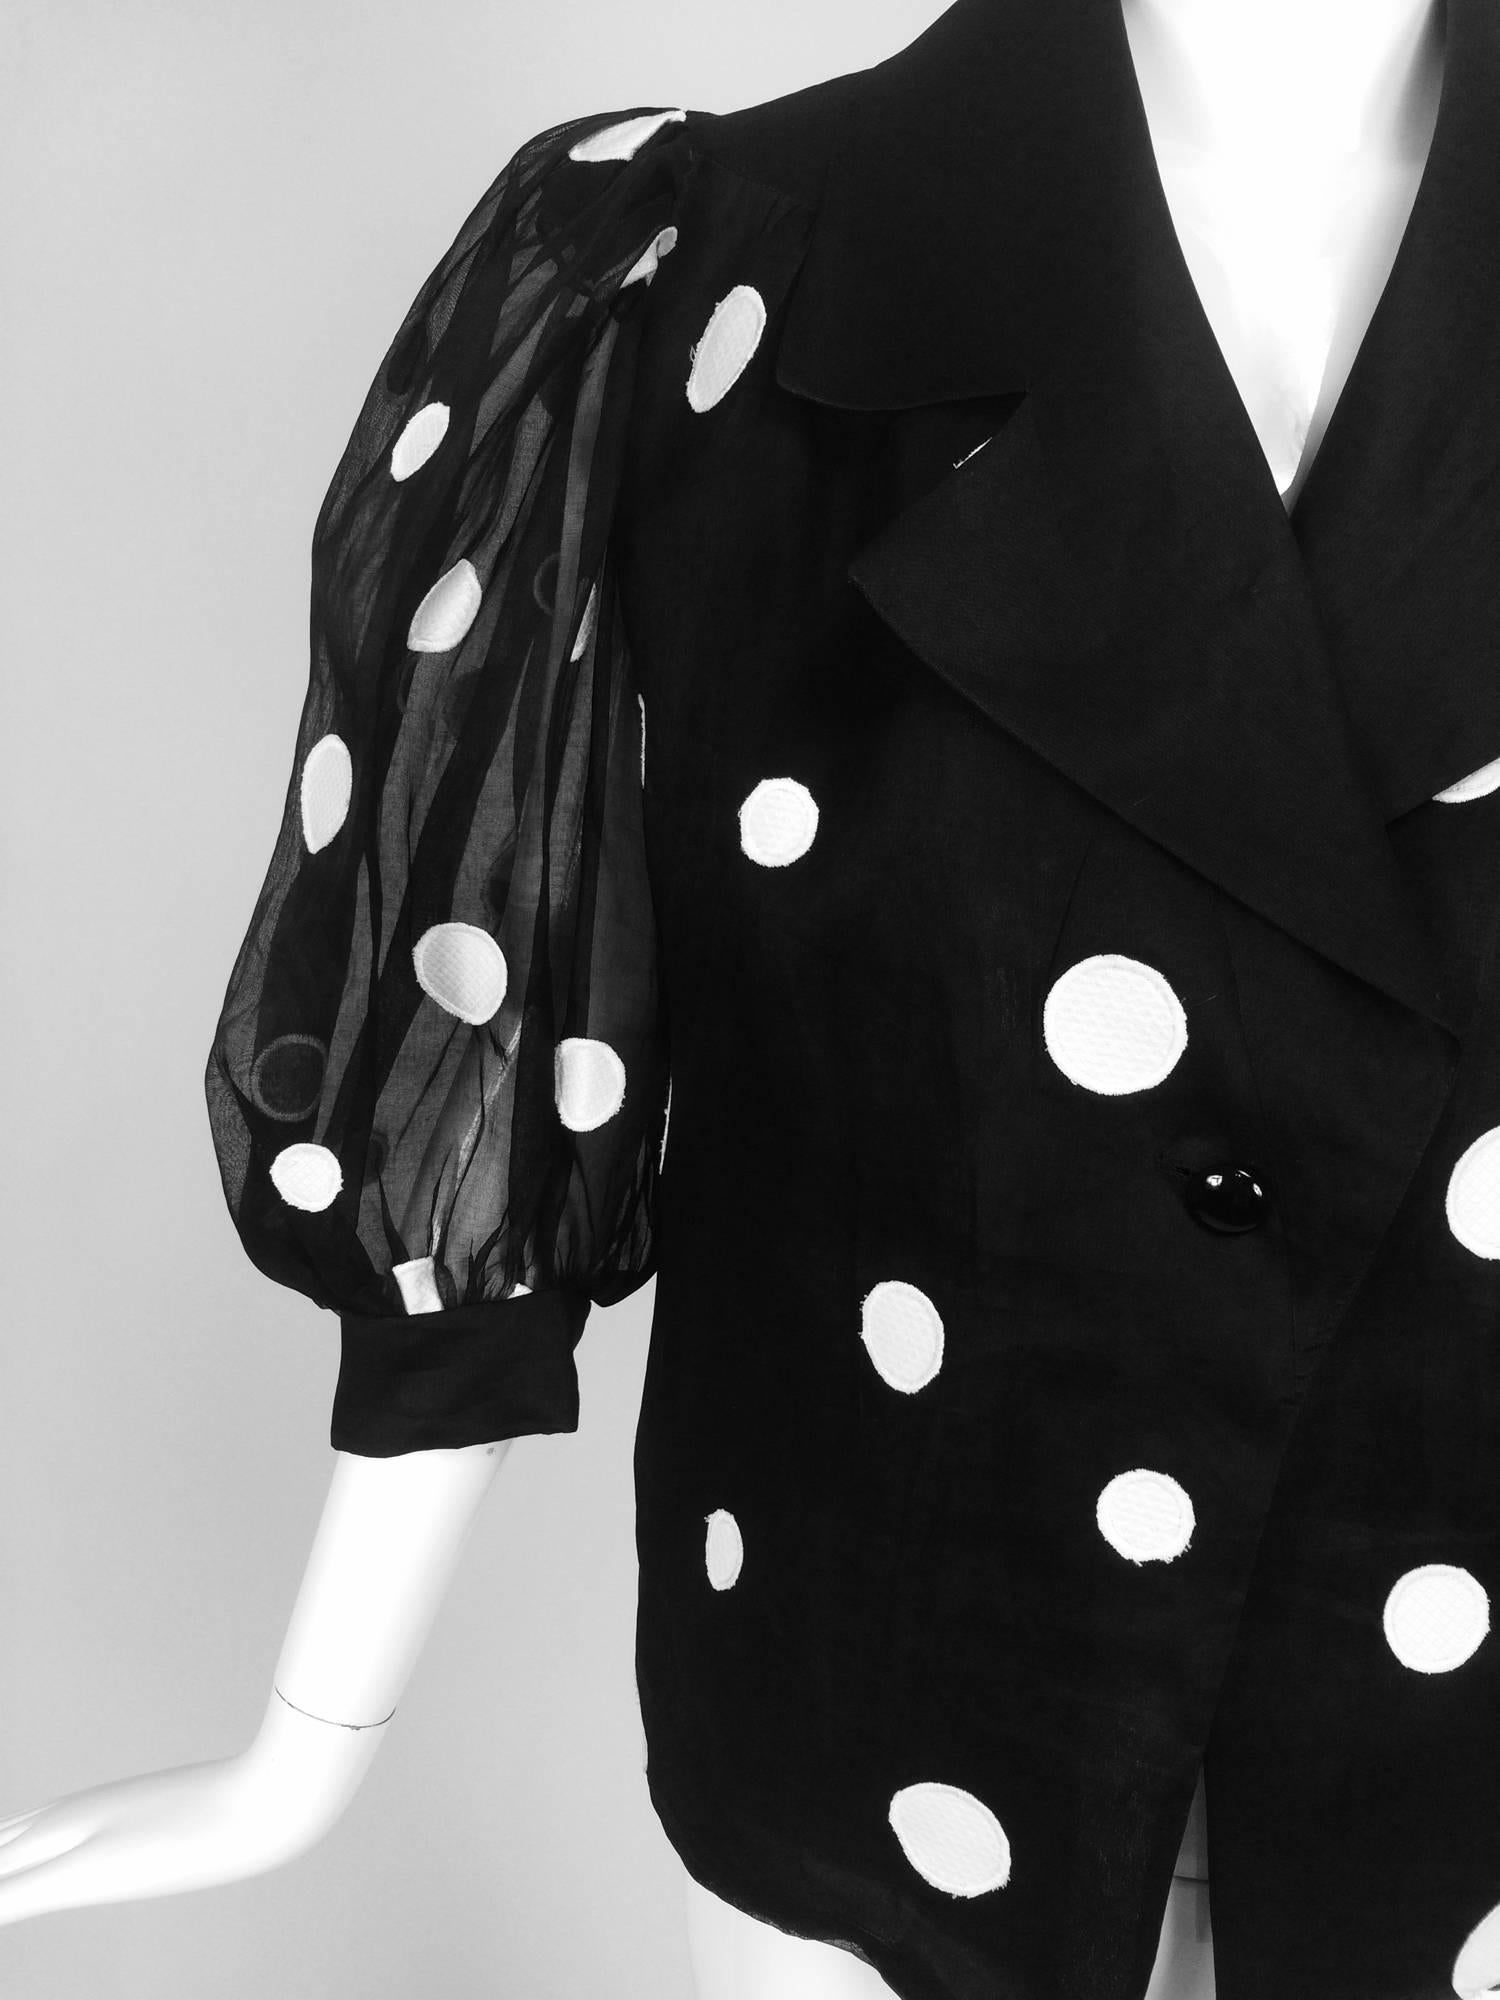 Givenchy black & white dot applique organdy blouse...Single button front closure blouse with full sheer unlined sleeves that have a banded and button cuffs...Notched lapels, V font neckline...The fabric is silk organdy, the appliques are white